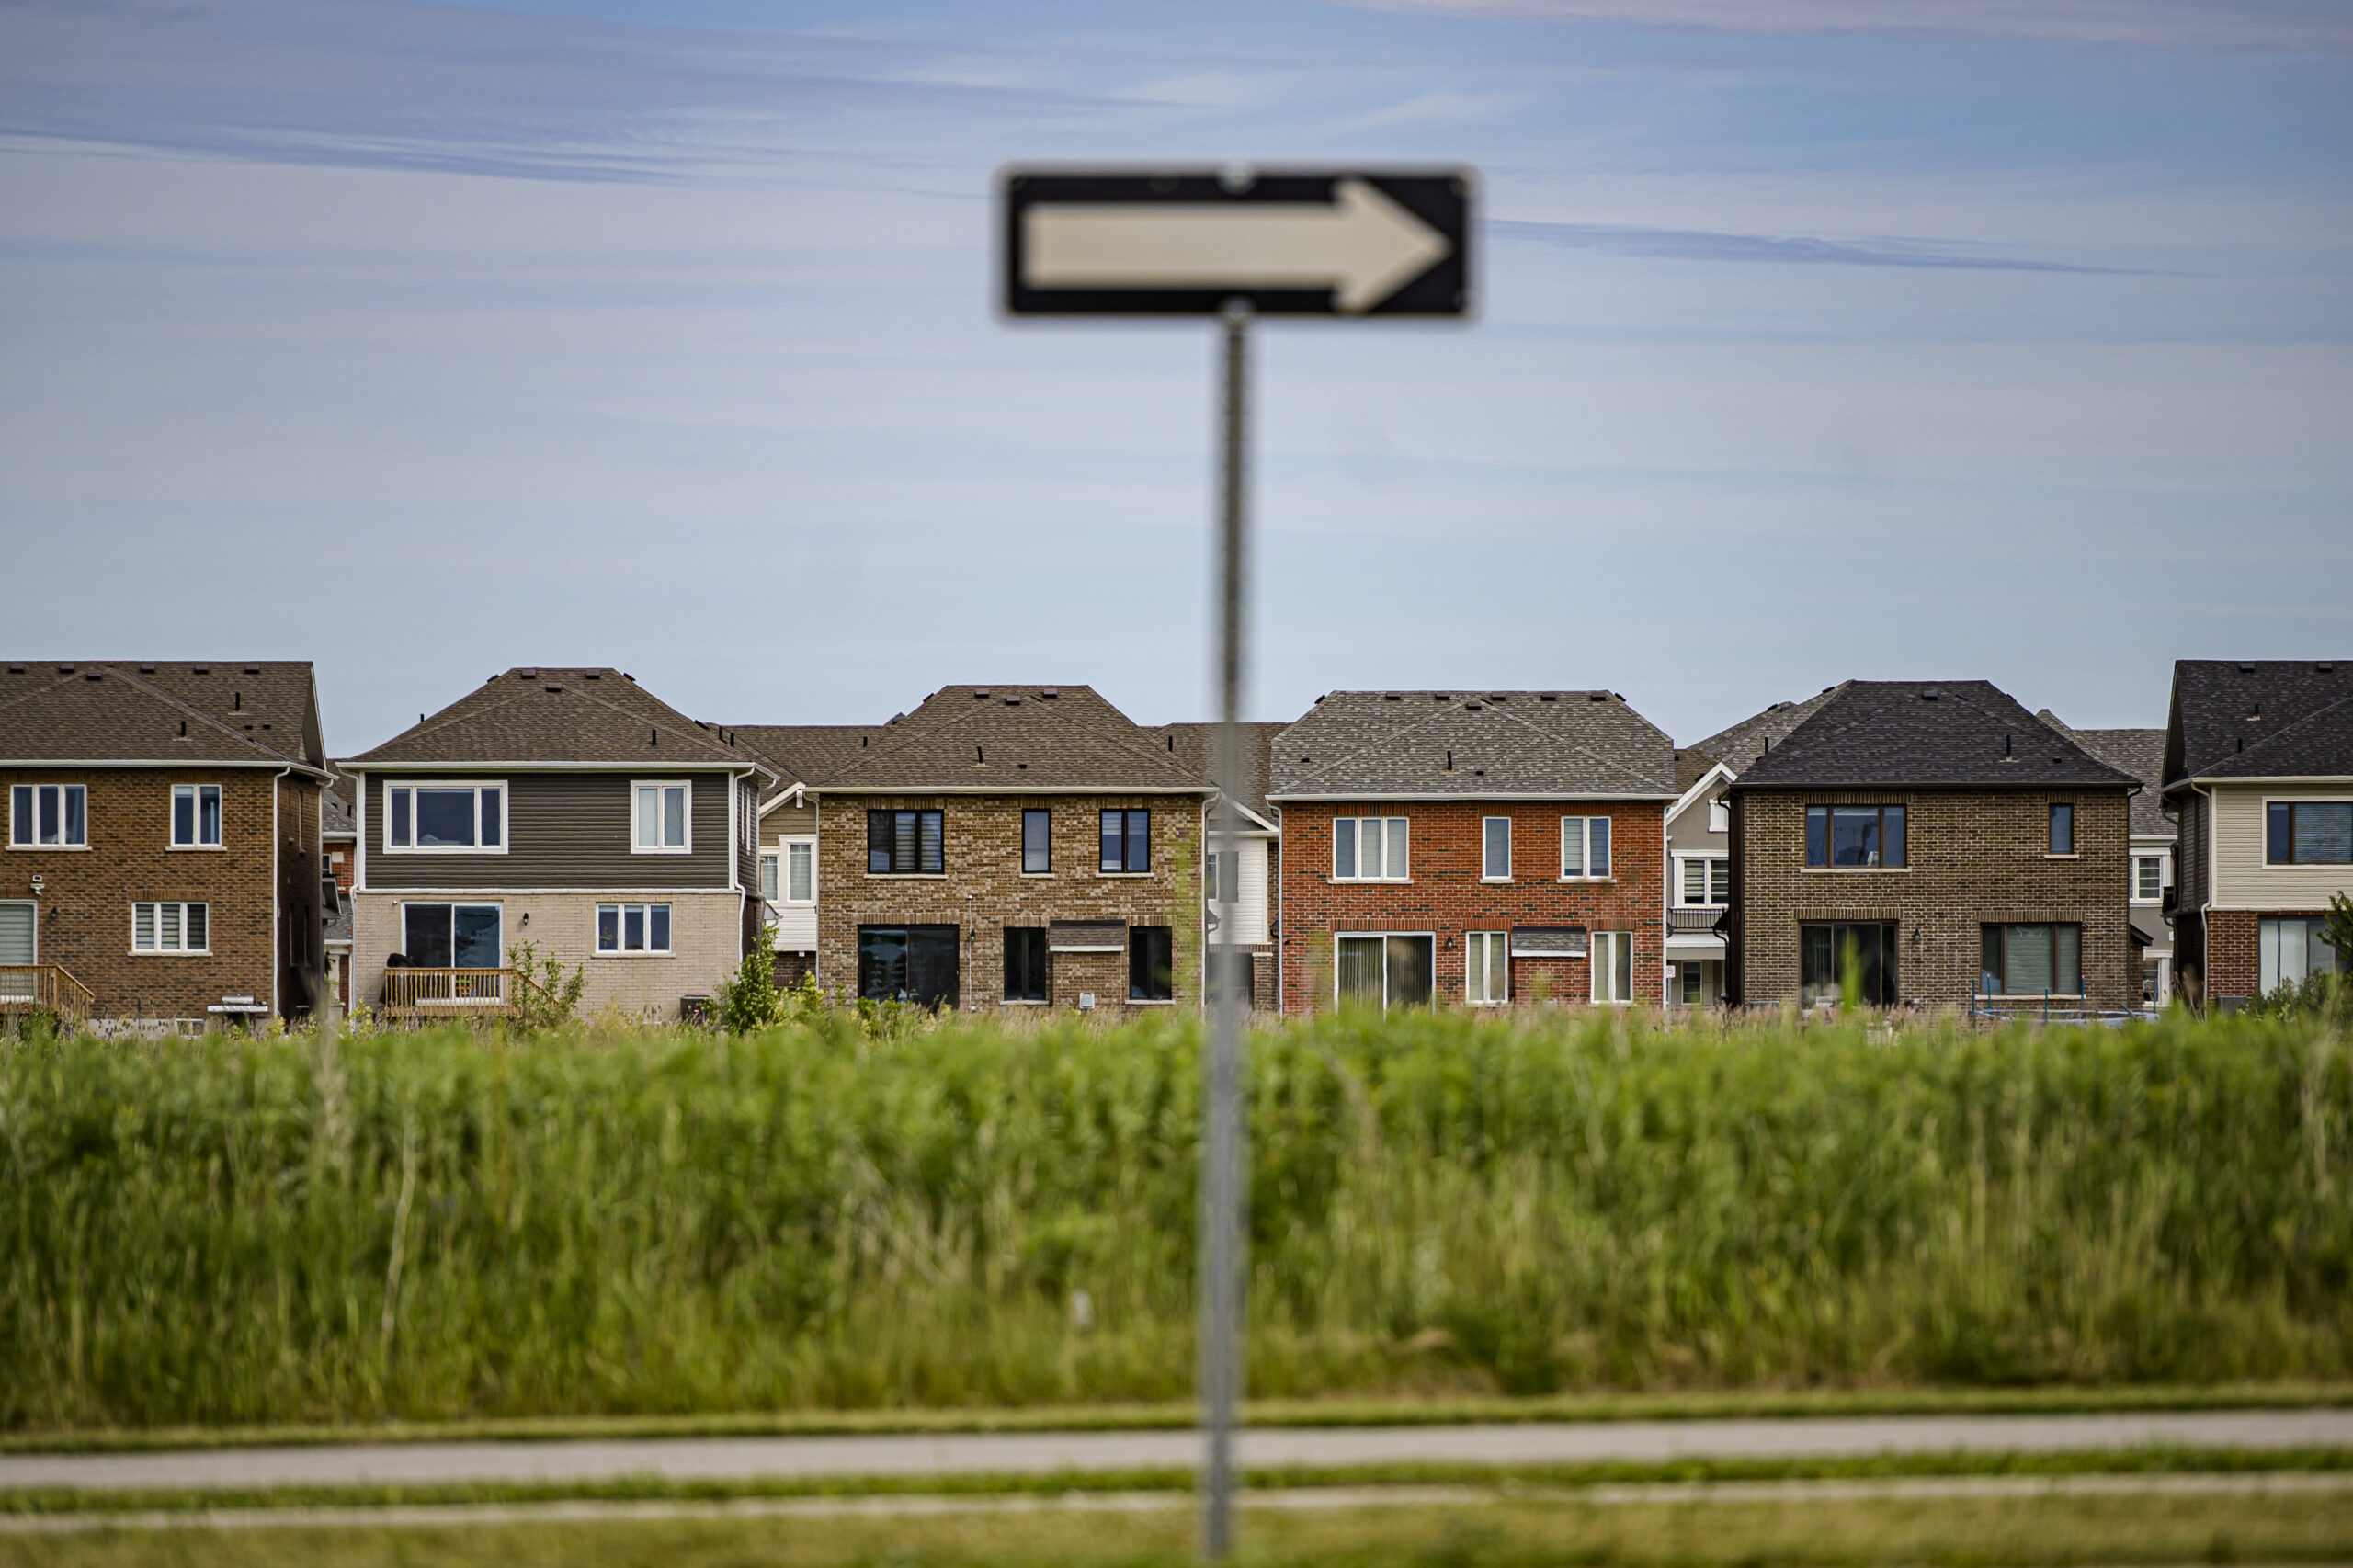 Ontario Greenbelt: A row of Single family homes in Halton, Ont.